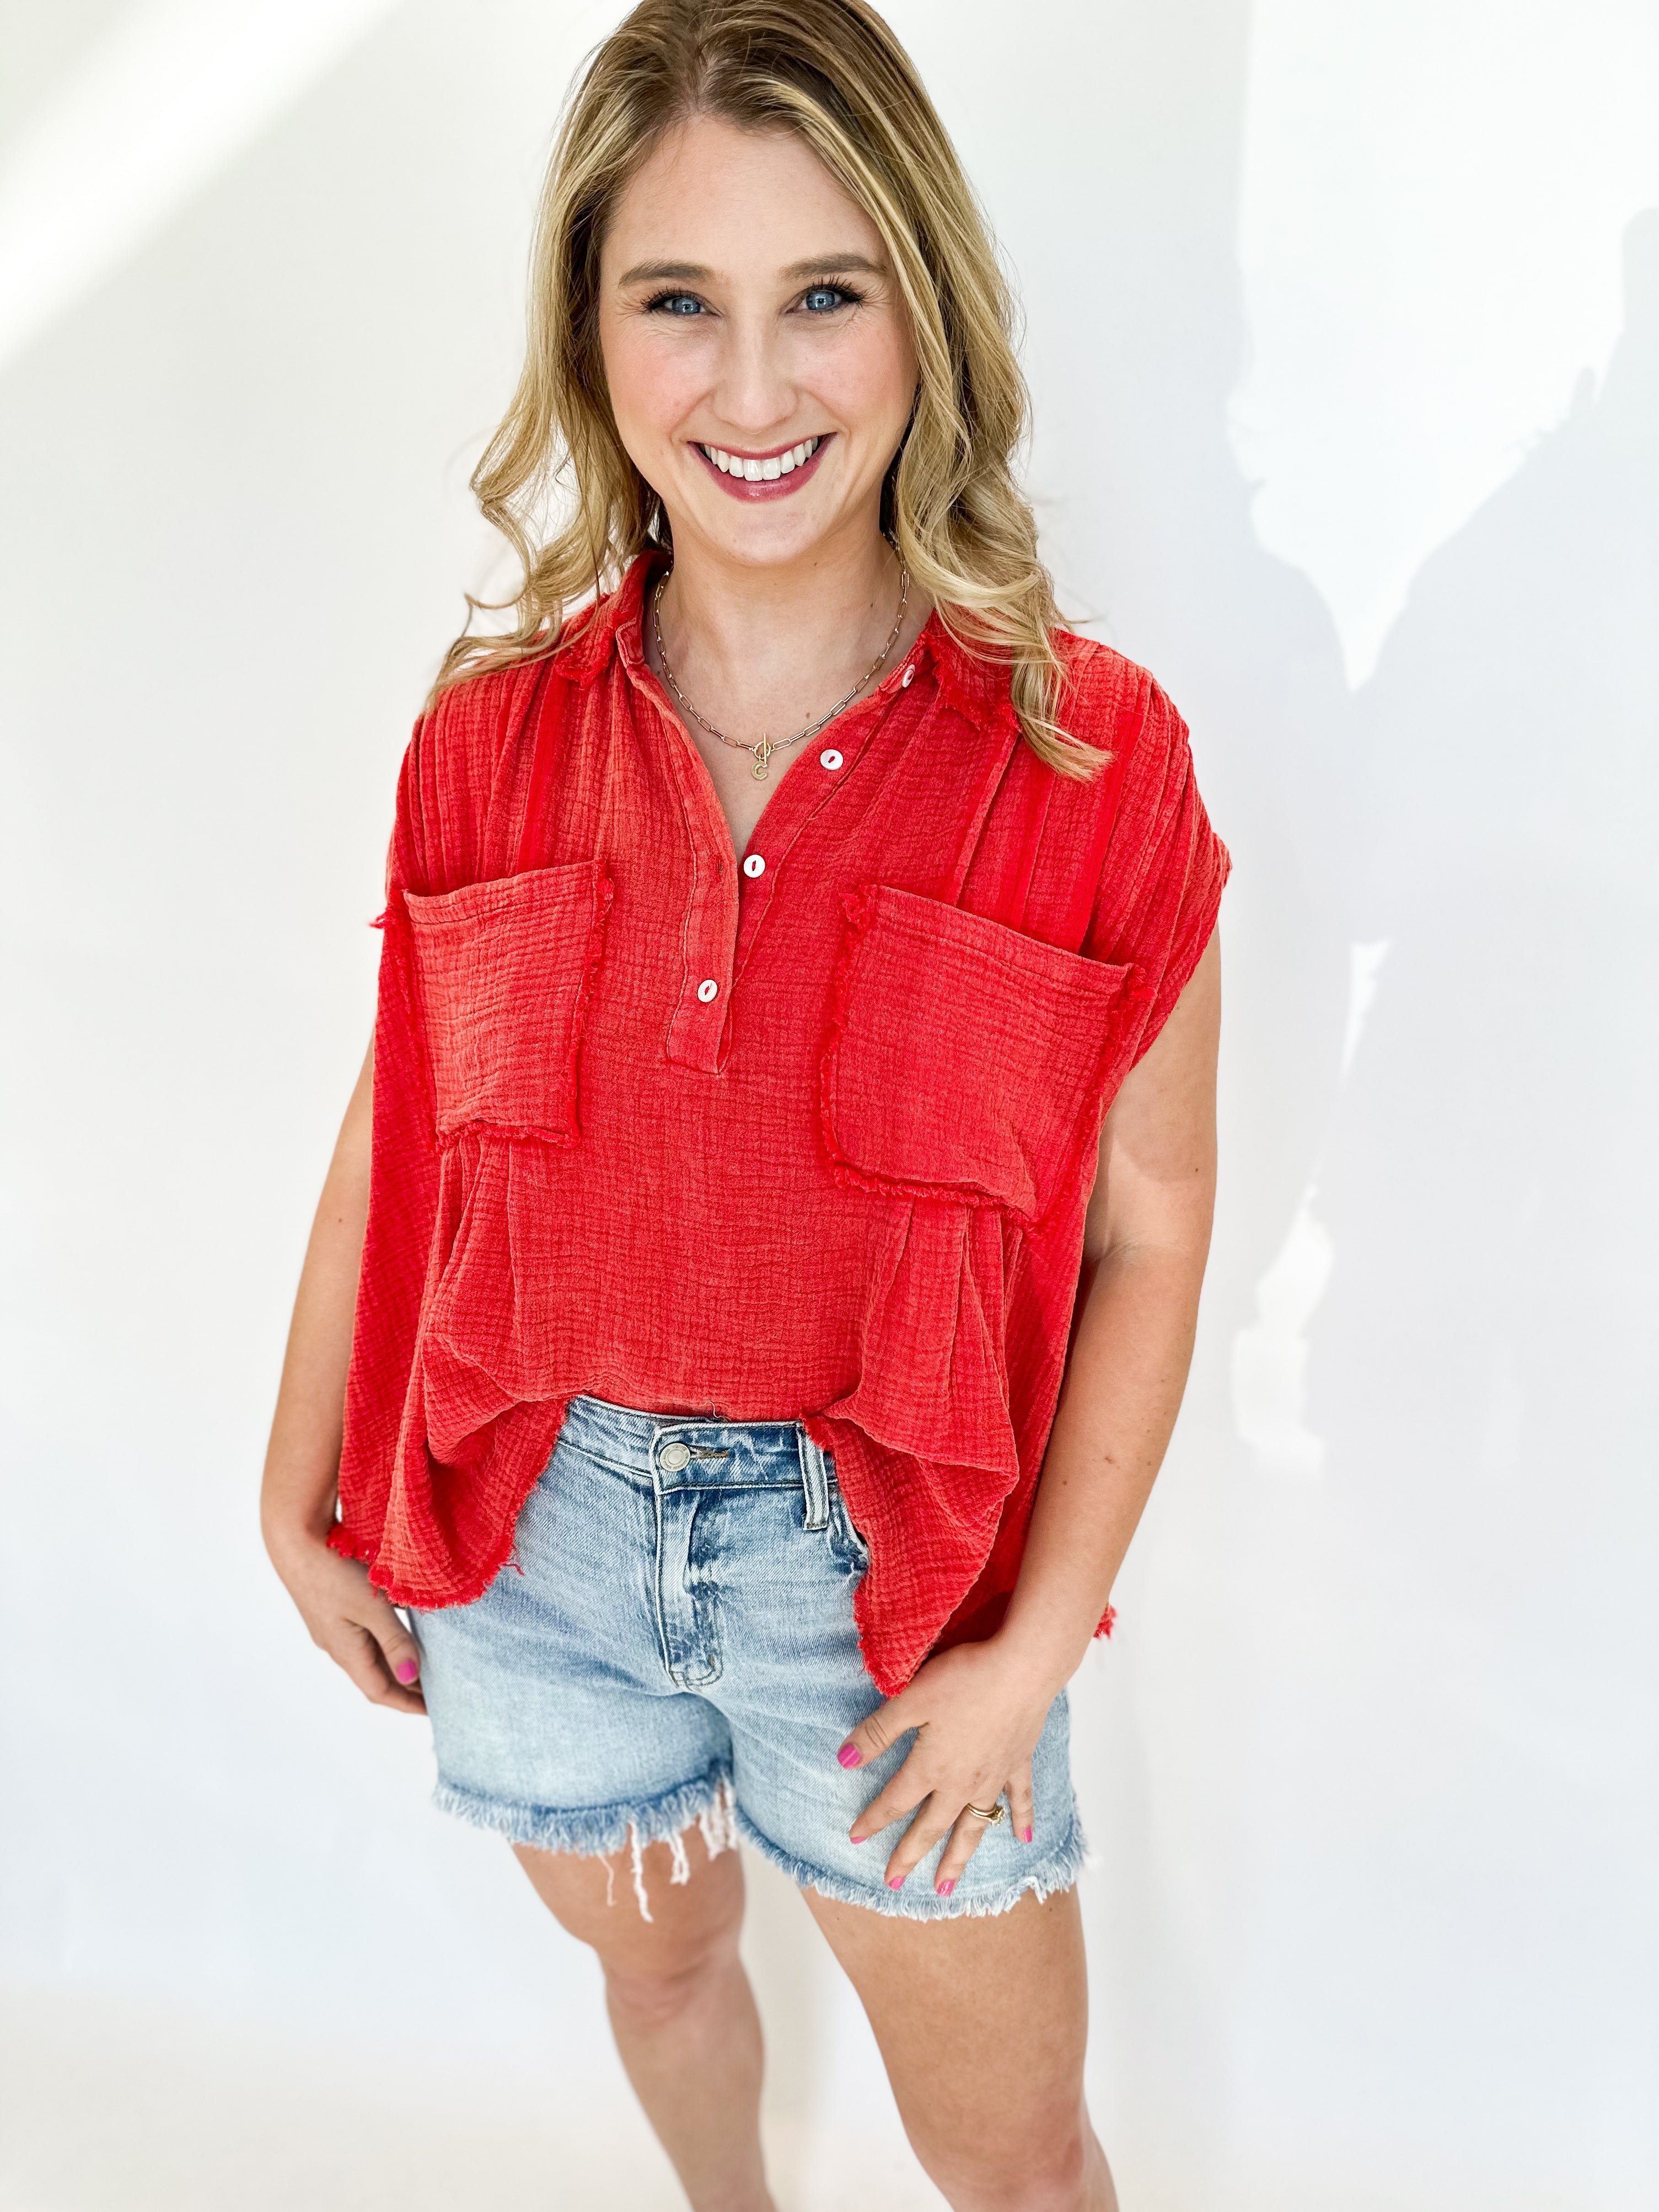 Cherry Red Henley Blouse-200 Fashion Blouses-FANTASTIC FAWN-July & June Women's Fashion Boutique Located in San Antonio, Texas